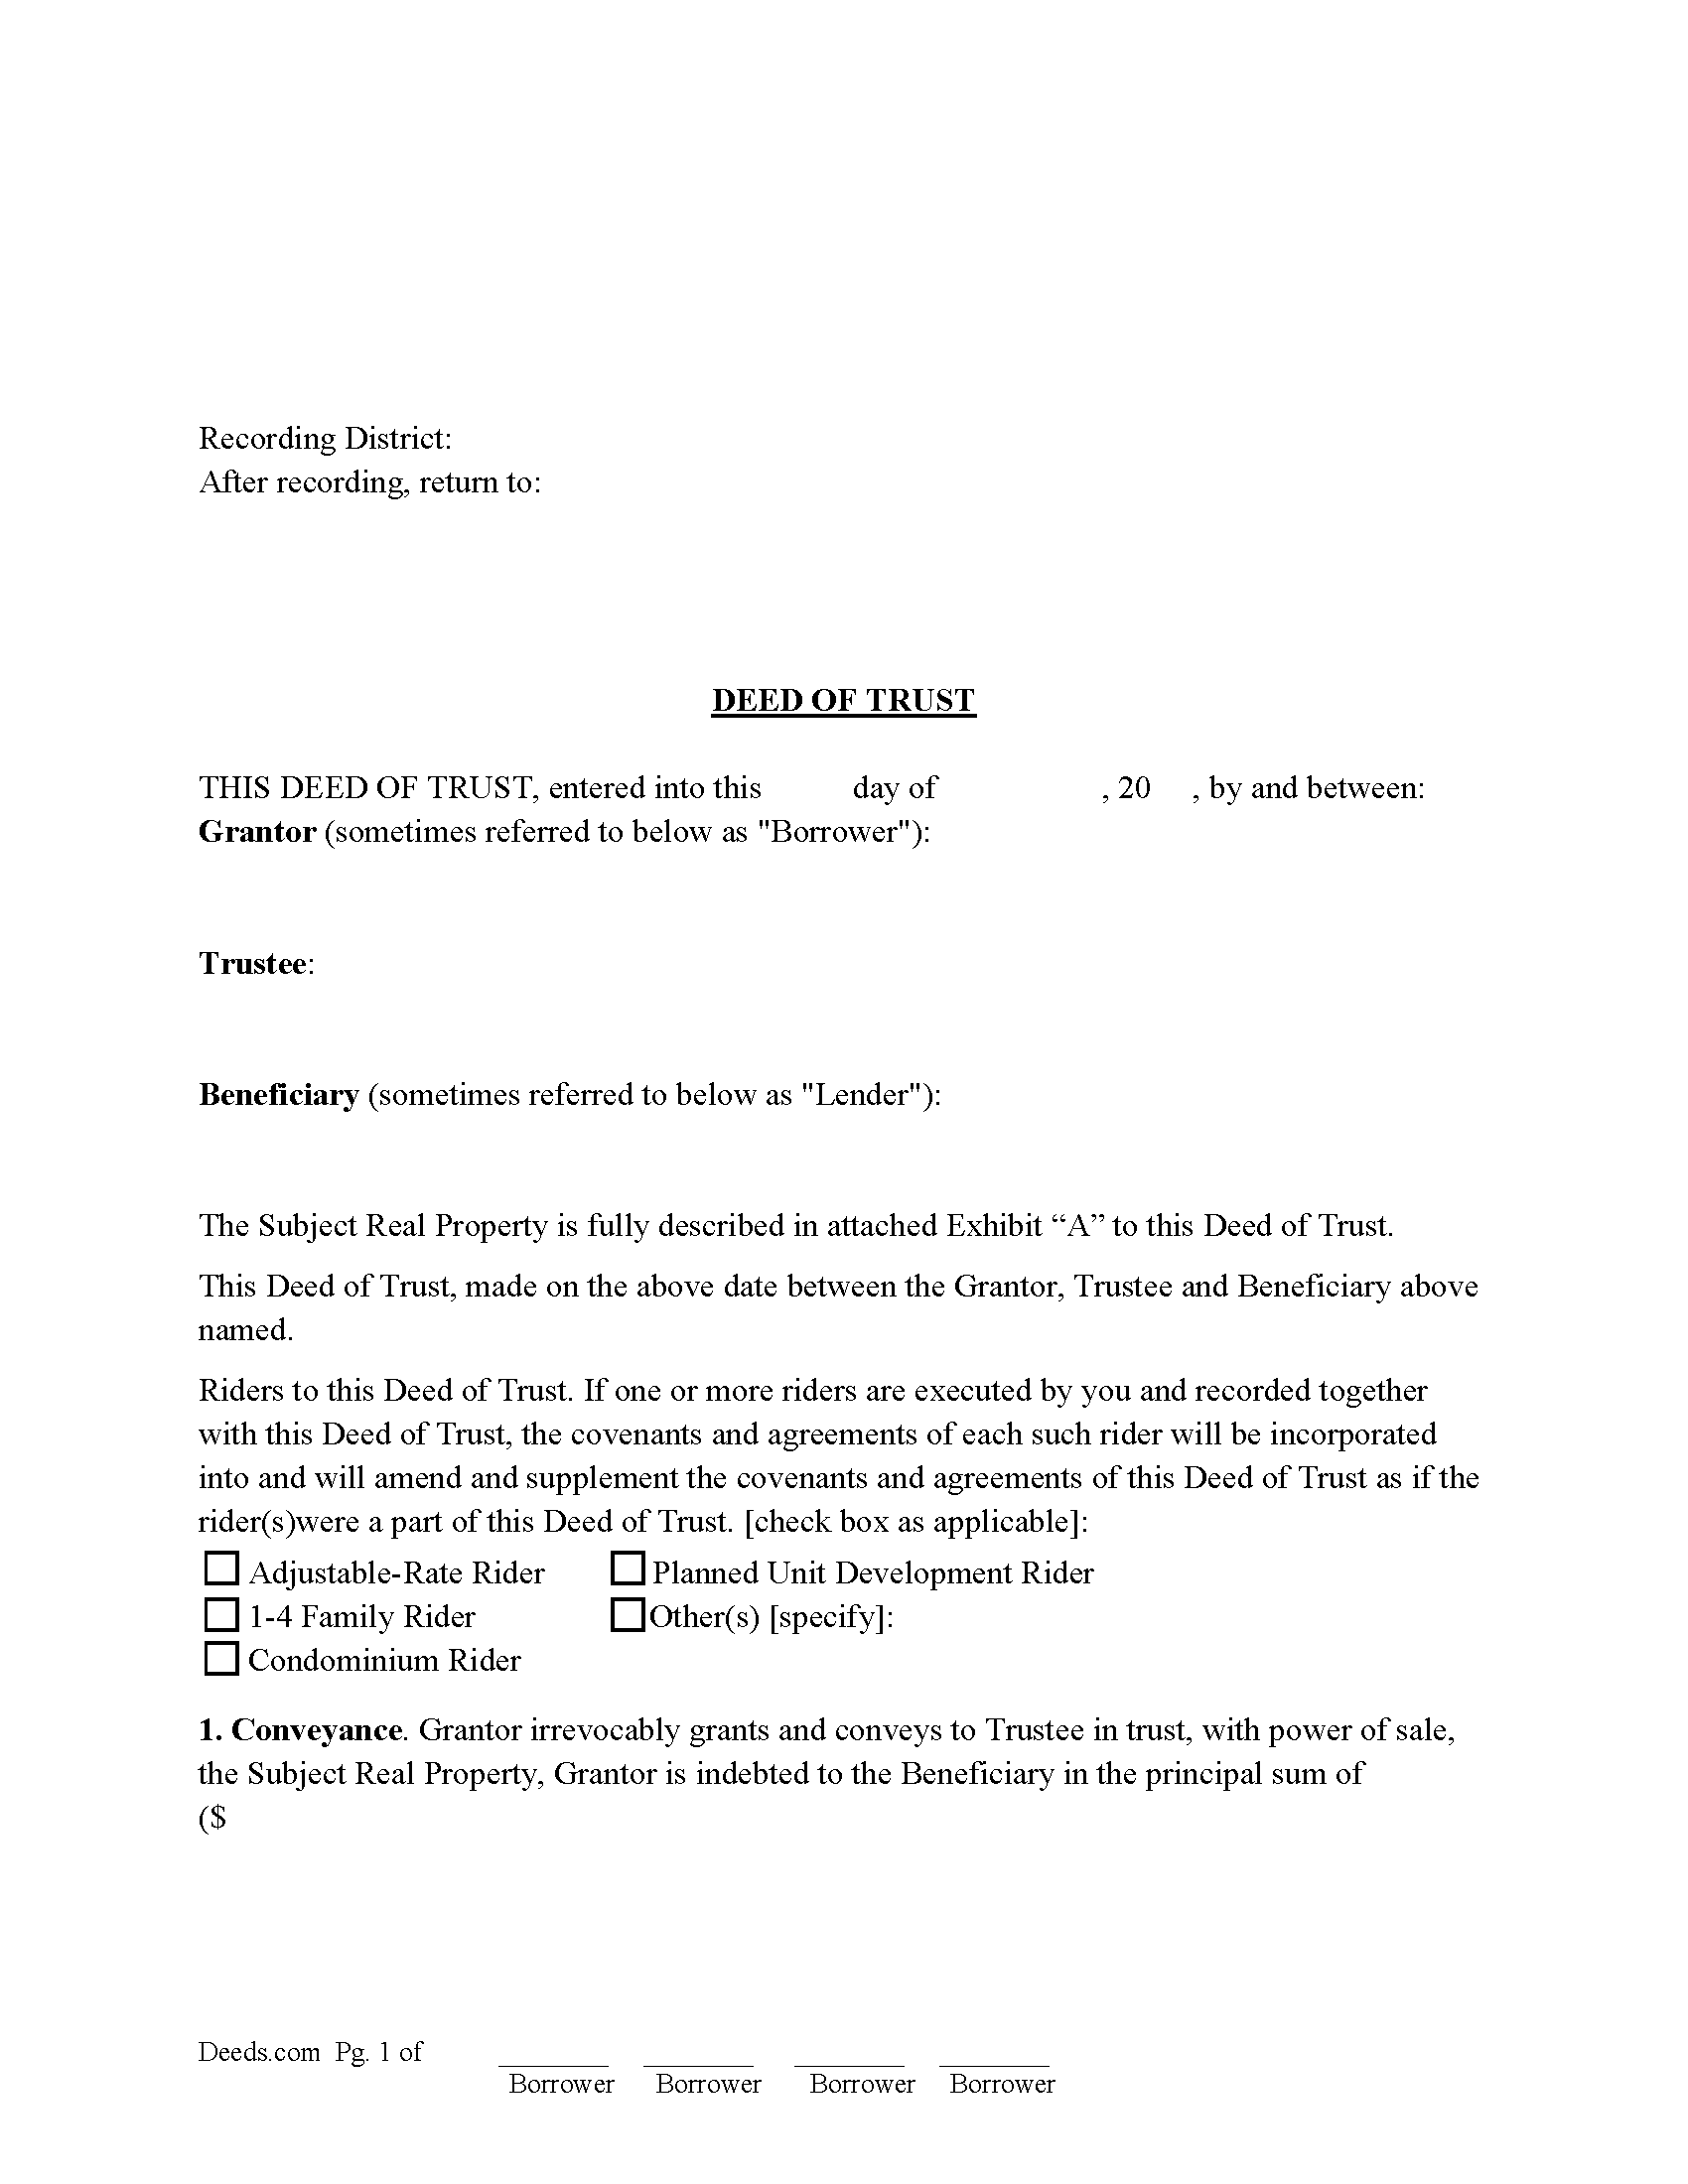 Alaska Deed of Trust and Promissory Note Image